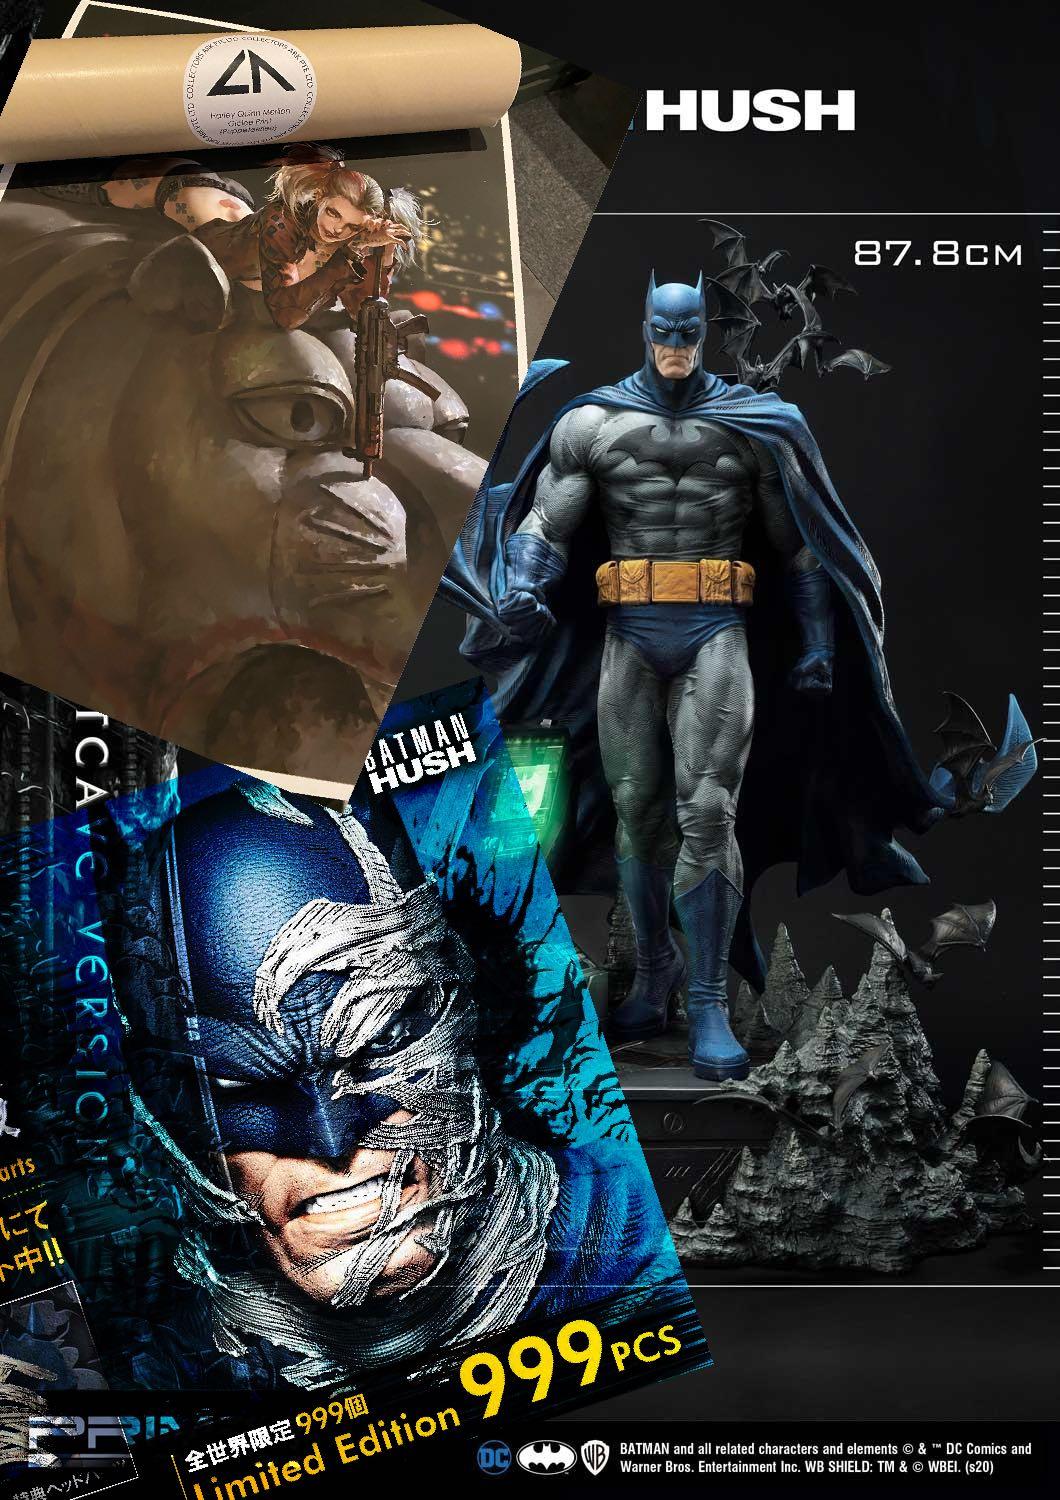 LAST PIECE! Hottest Prime 1 Jim Lee Hush Batman BatCave Deluxe With  BONUS!!! FOC Exclusive Collectors Ark Harley Quinn Merlion Giclee A2 Print,  Hobbies & Toys, Toys & Games on Carousell